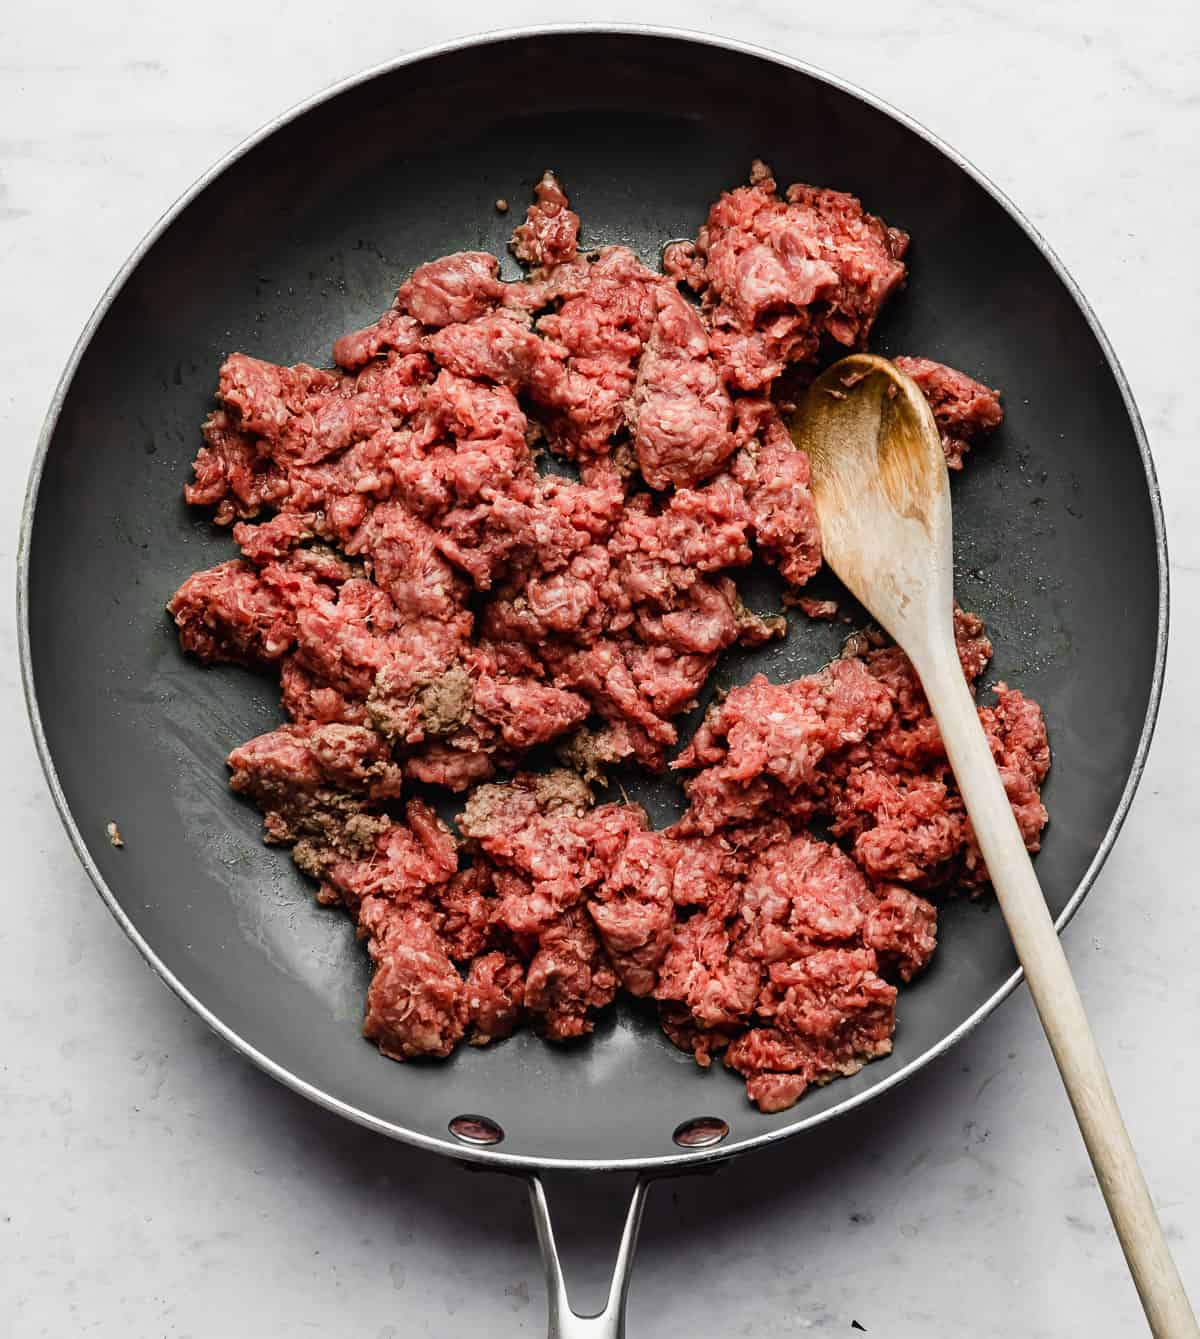 Raw ground beef in a grey skillet on a white background.